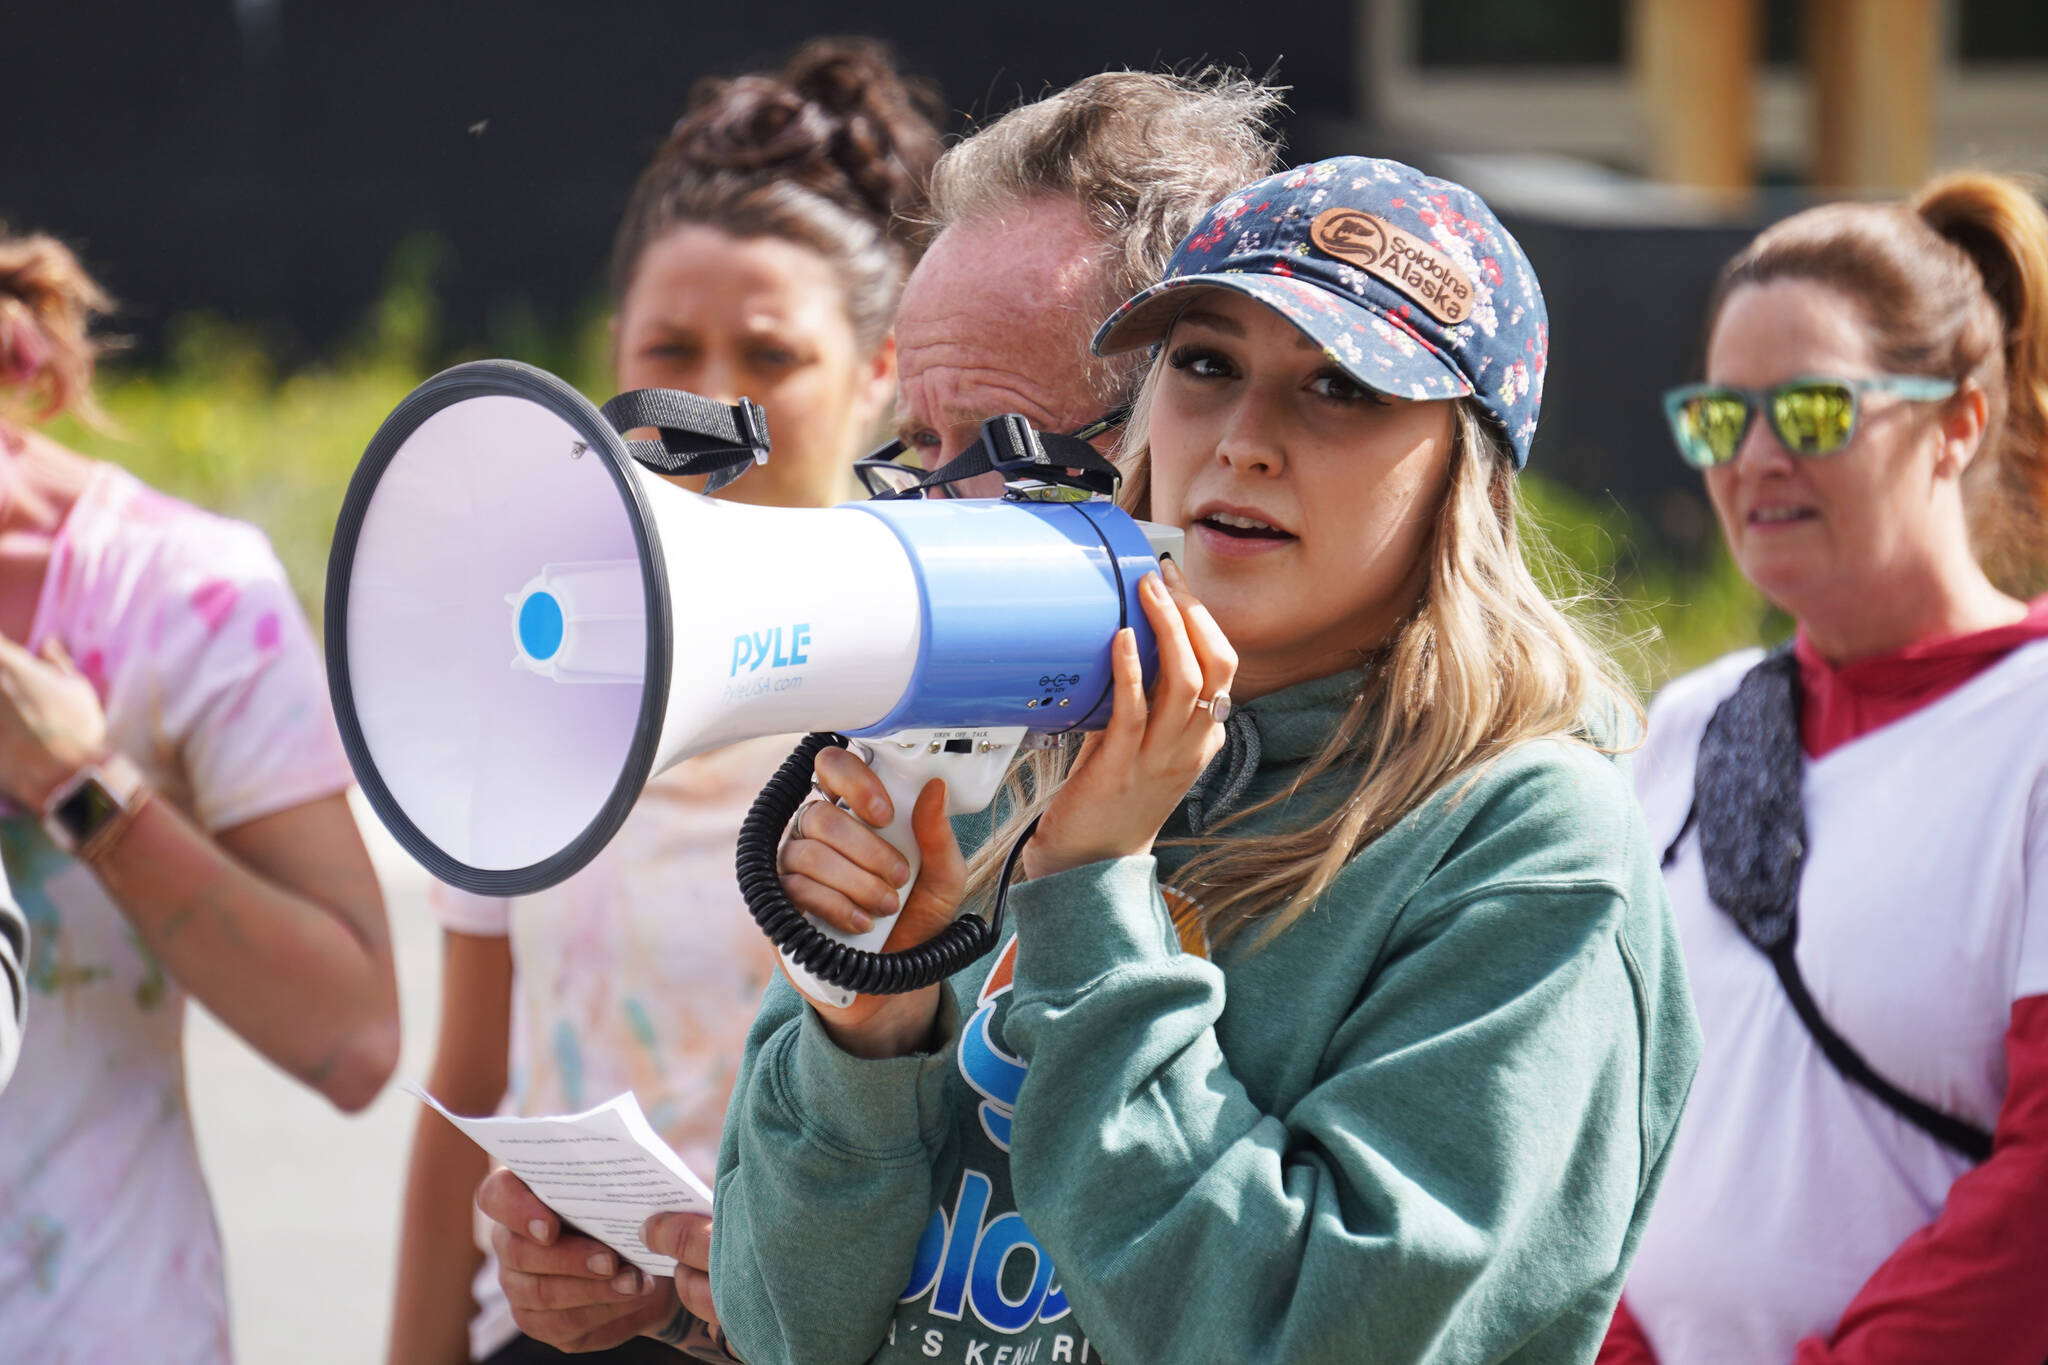 Soldotna Chamber of Commerce Executive Director Maddy McElrea speaks during a color run held as part of during the Levitt AMP Soldotna Music Series on Wednesday, June 7, 2023, at the Kenai National Wildlife Refuge Visitor’s Center in Soldotna, Alaska. (Jake Dye/Peninsula Clarion)